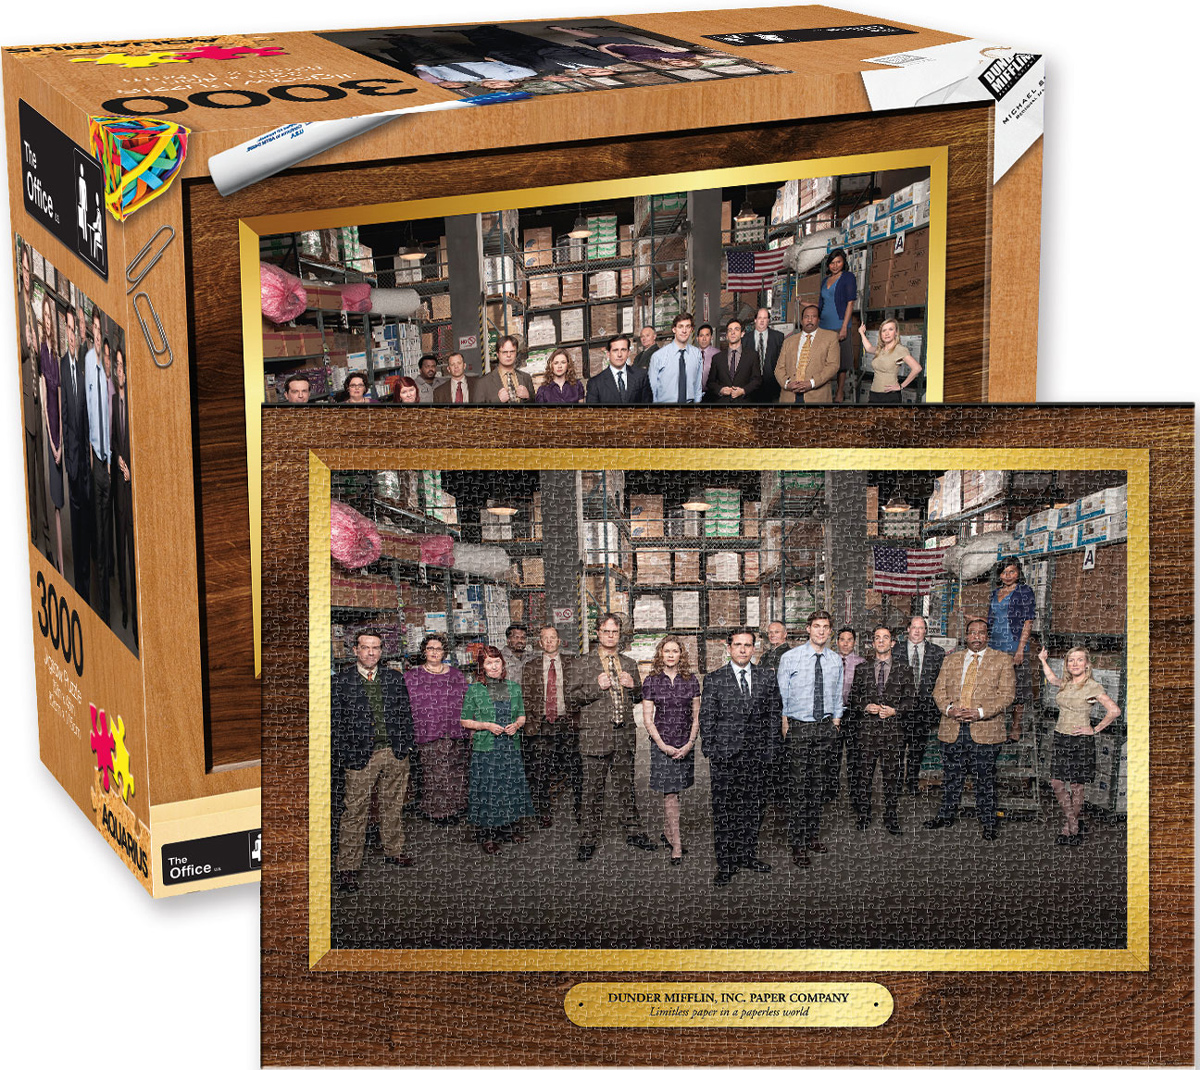 The Office Movies / Books / TV Jigsaw Puzzle